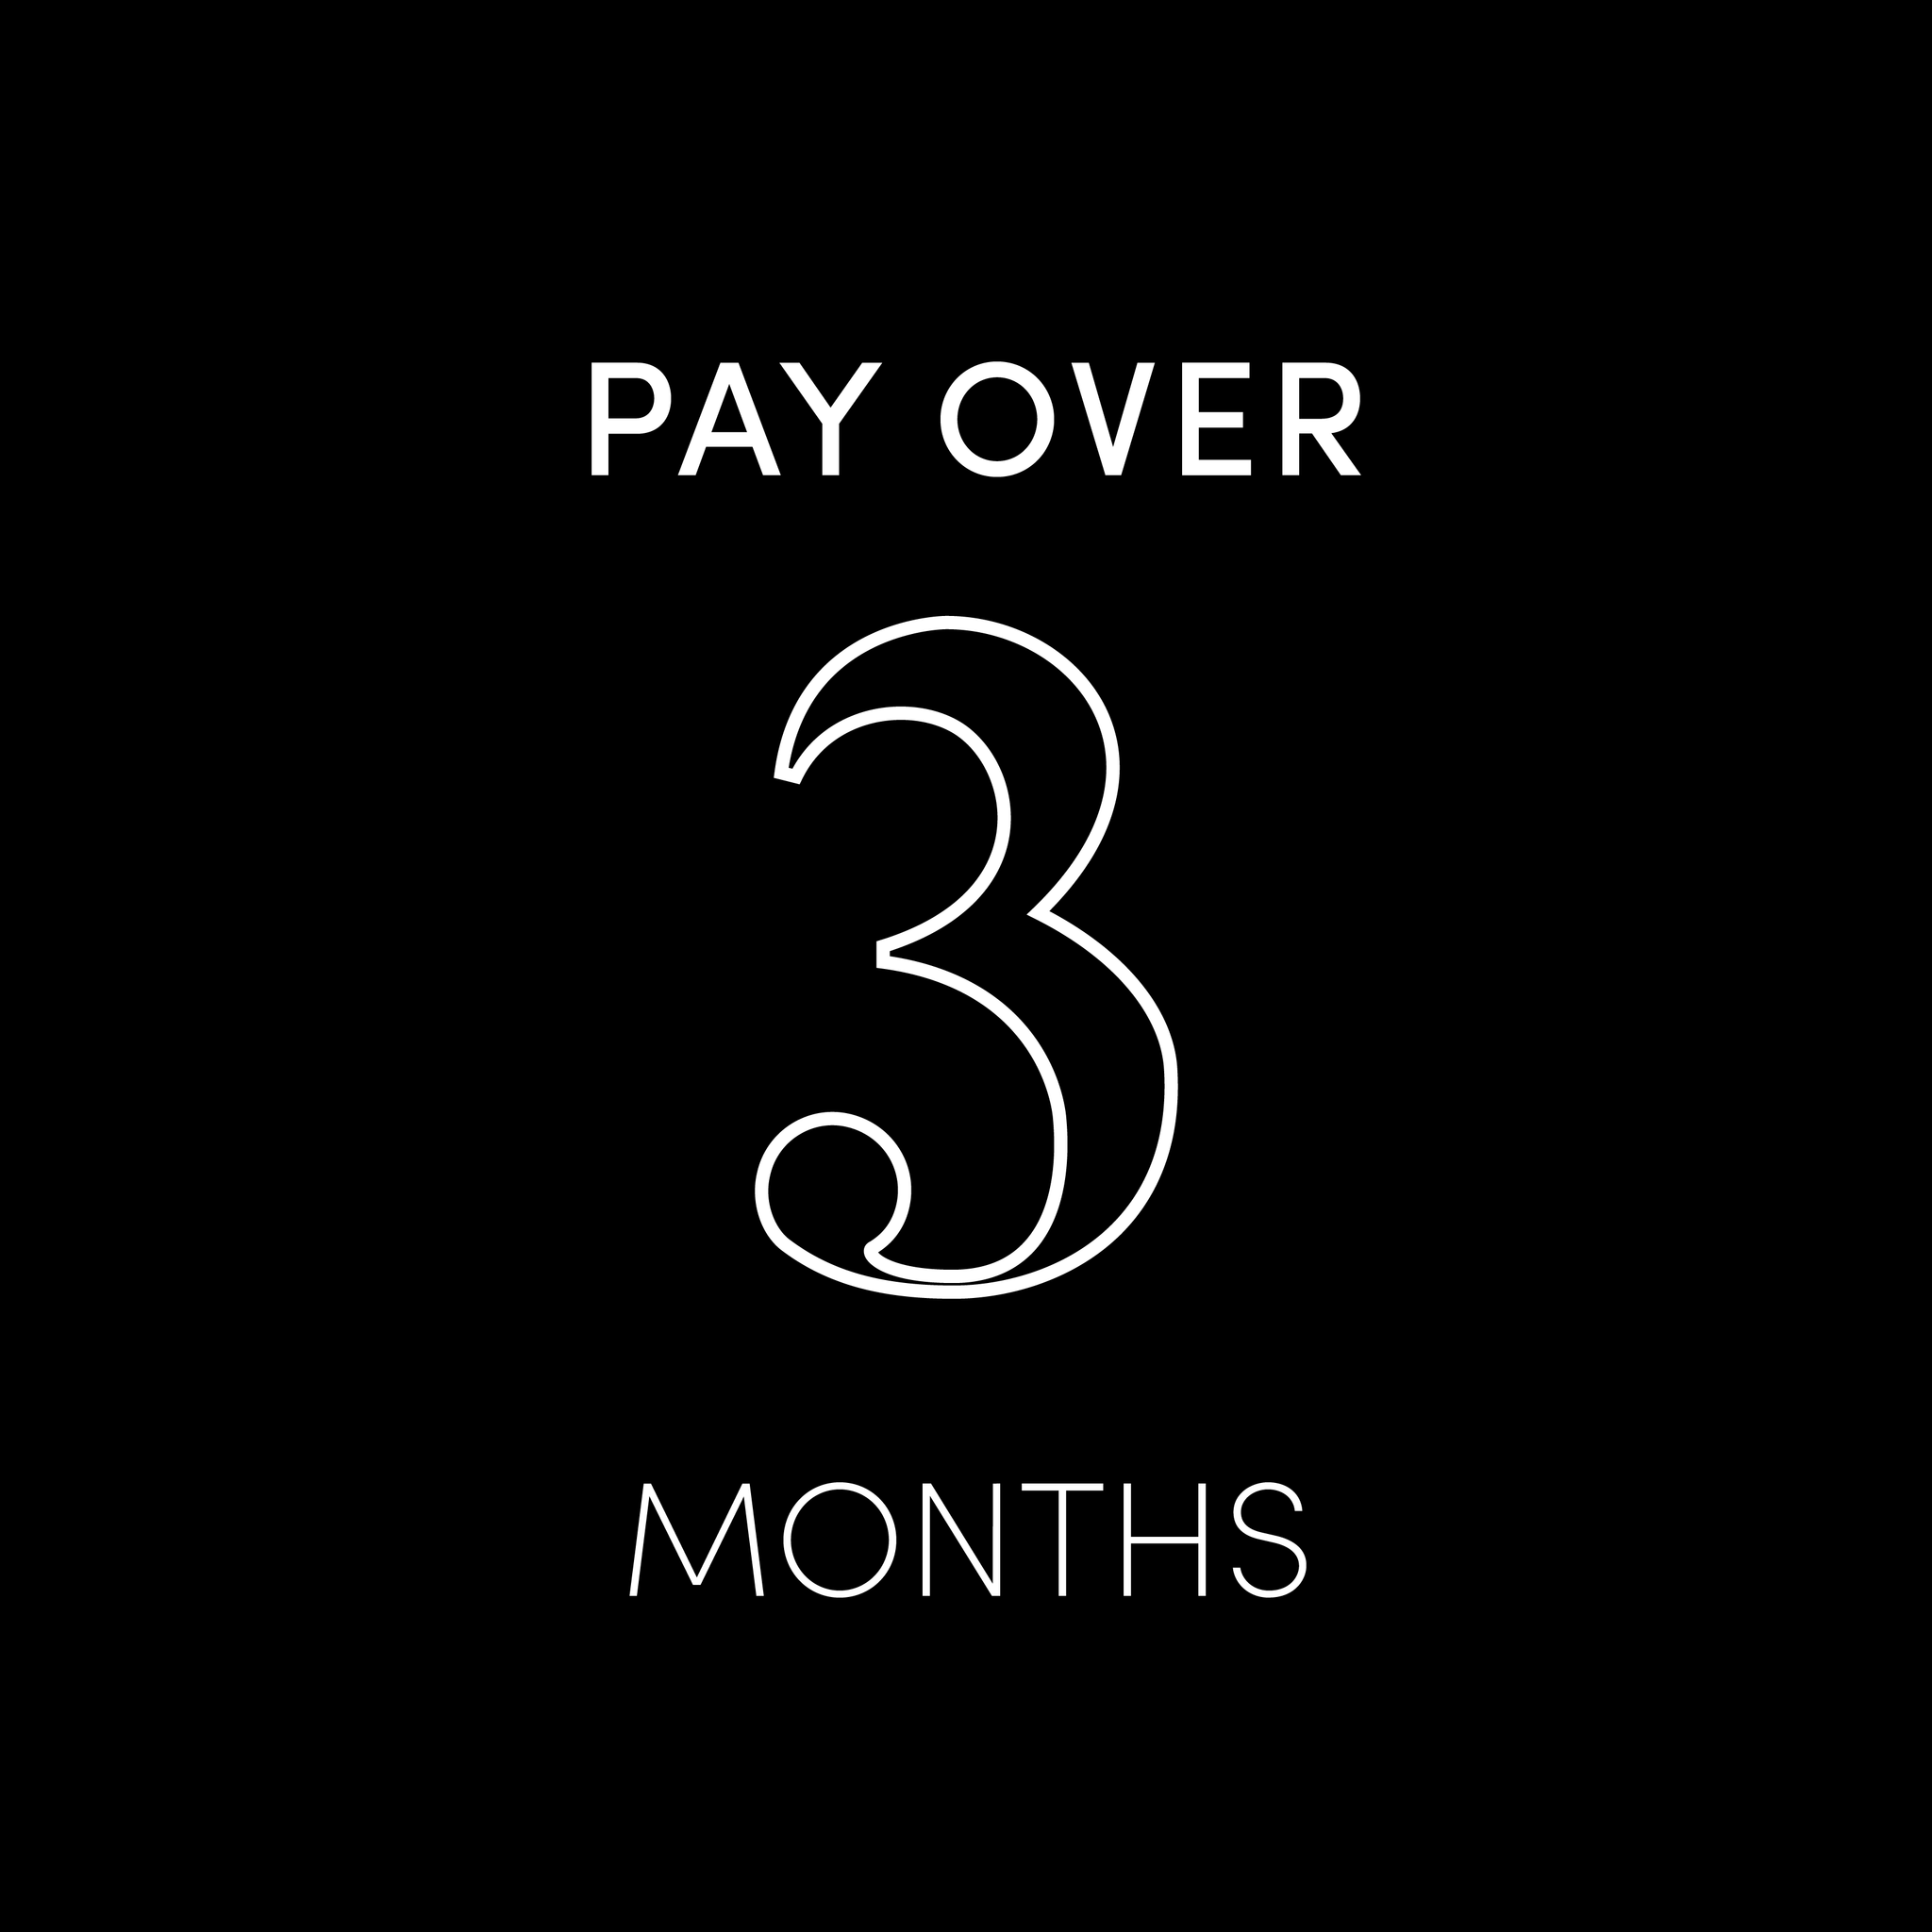 Pay over 3 months